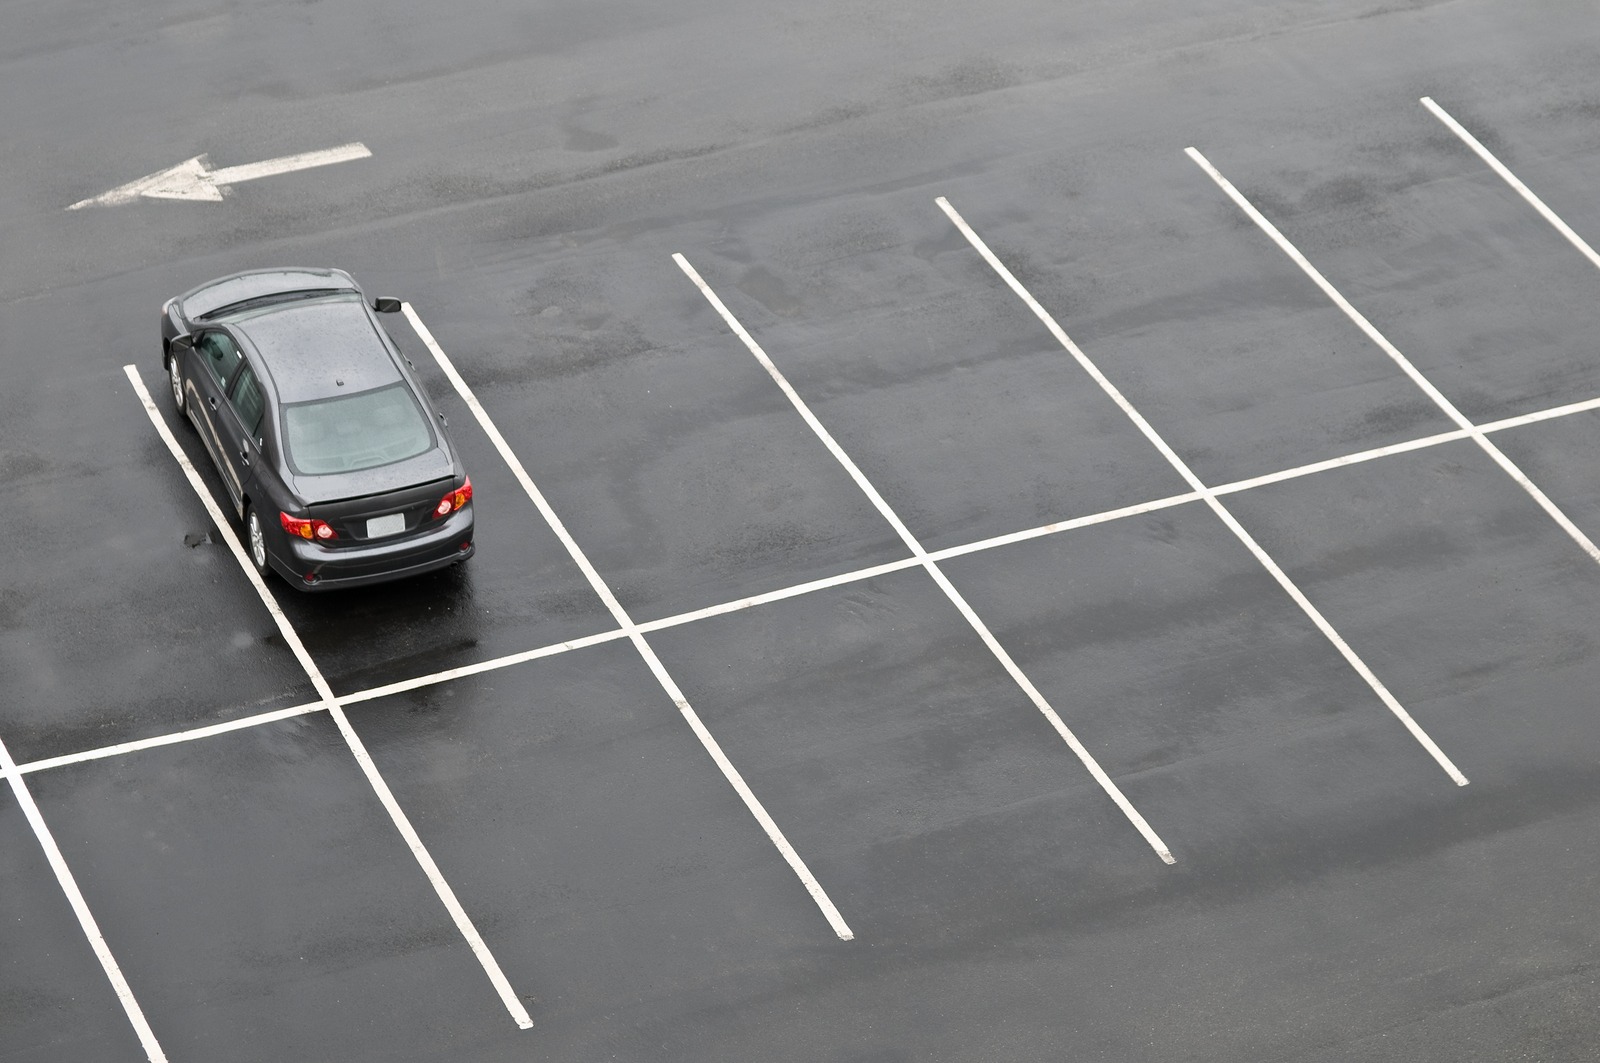 commercial-parking-lot-paving-company-toronto-the-gta-melrose